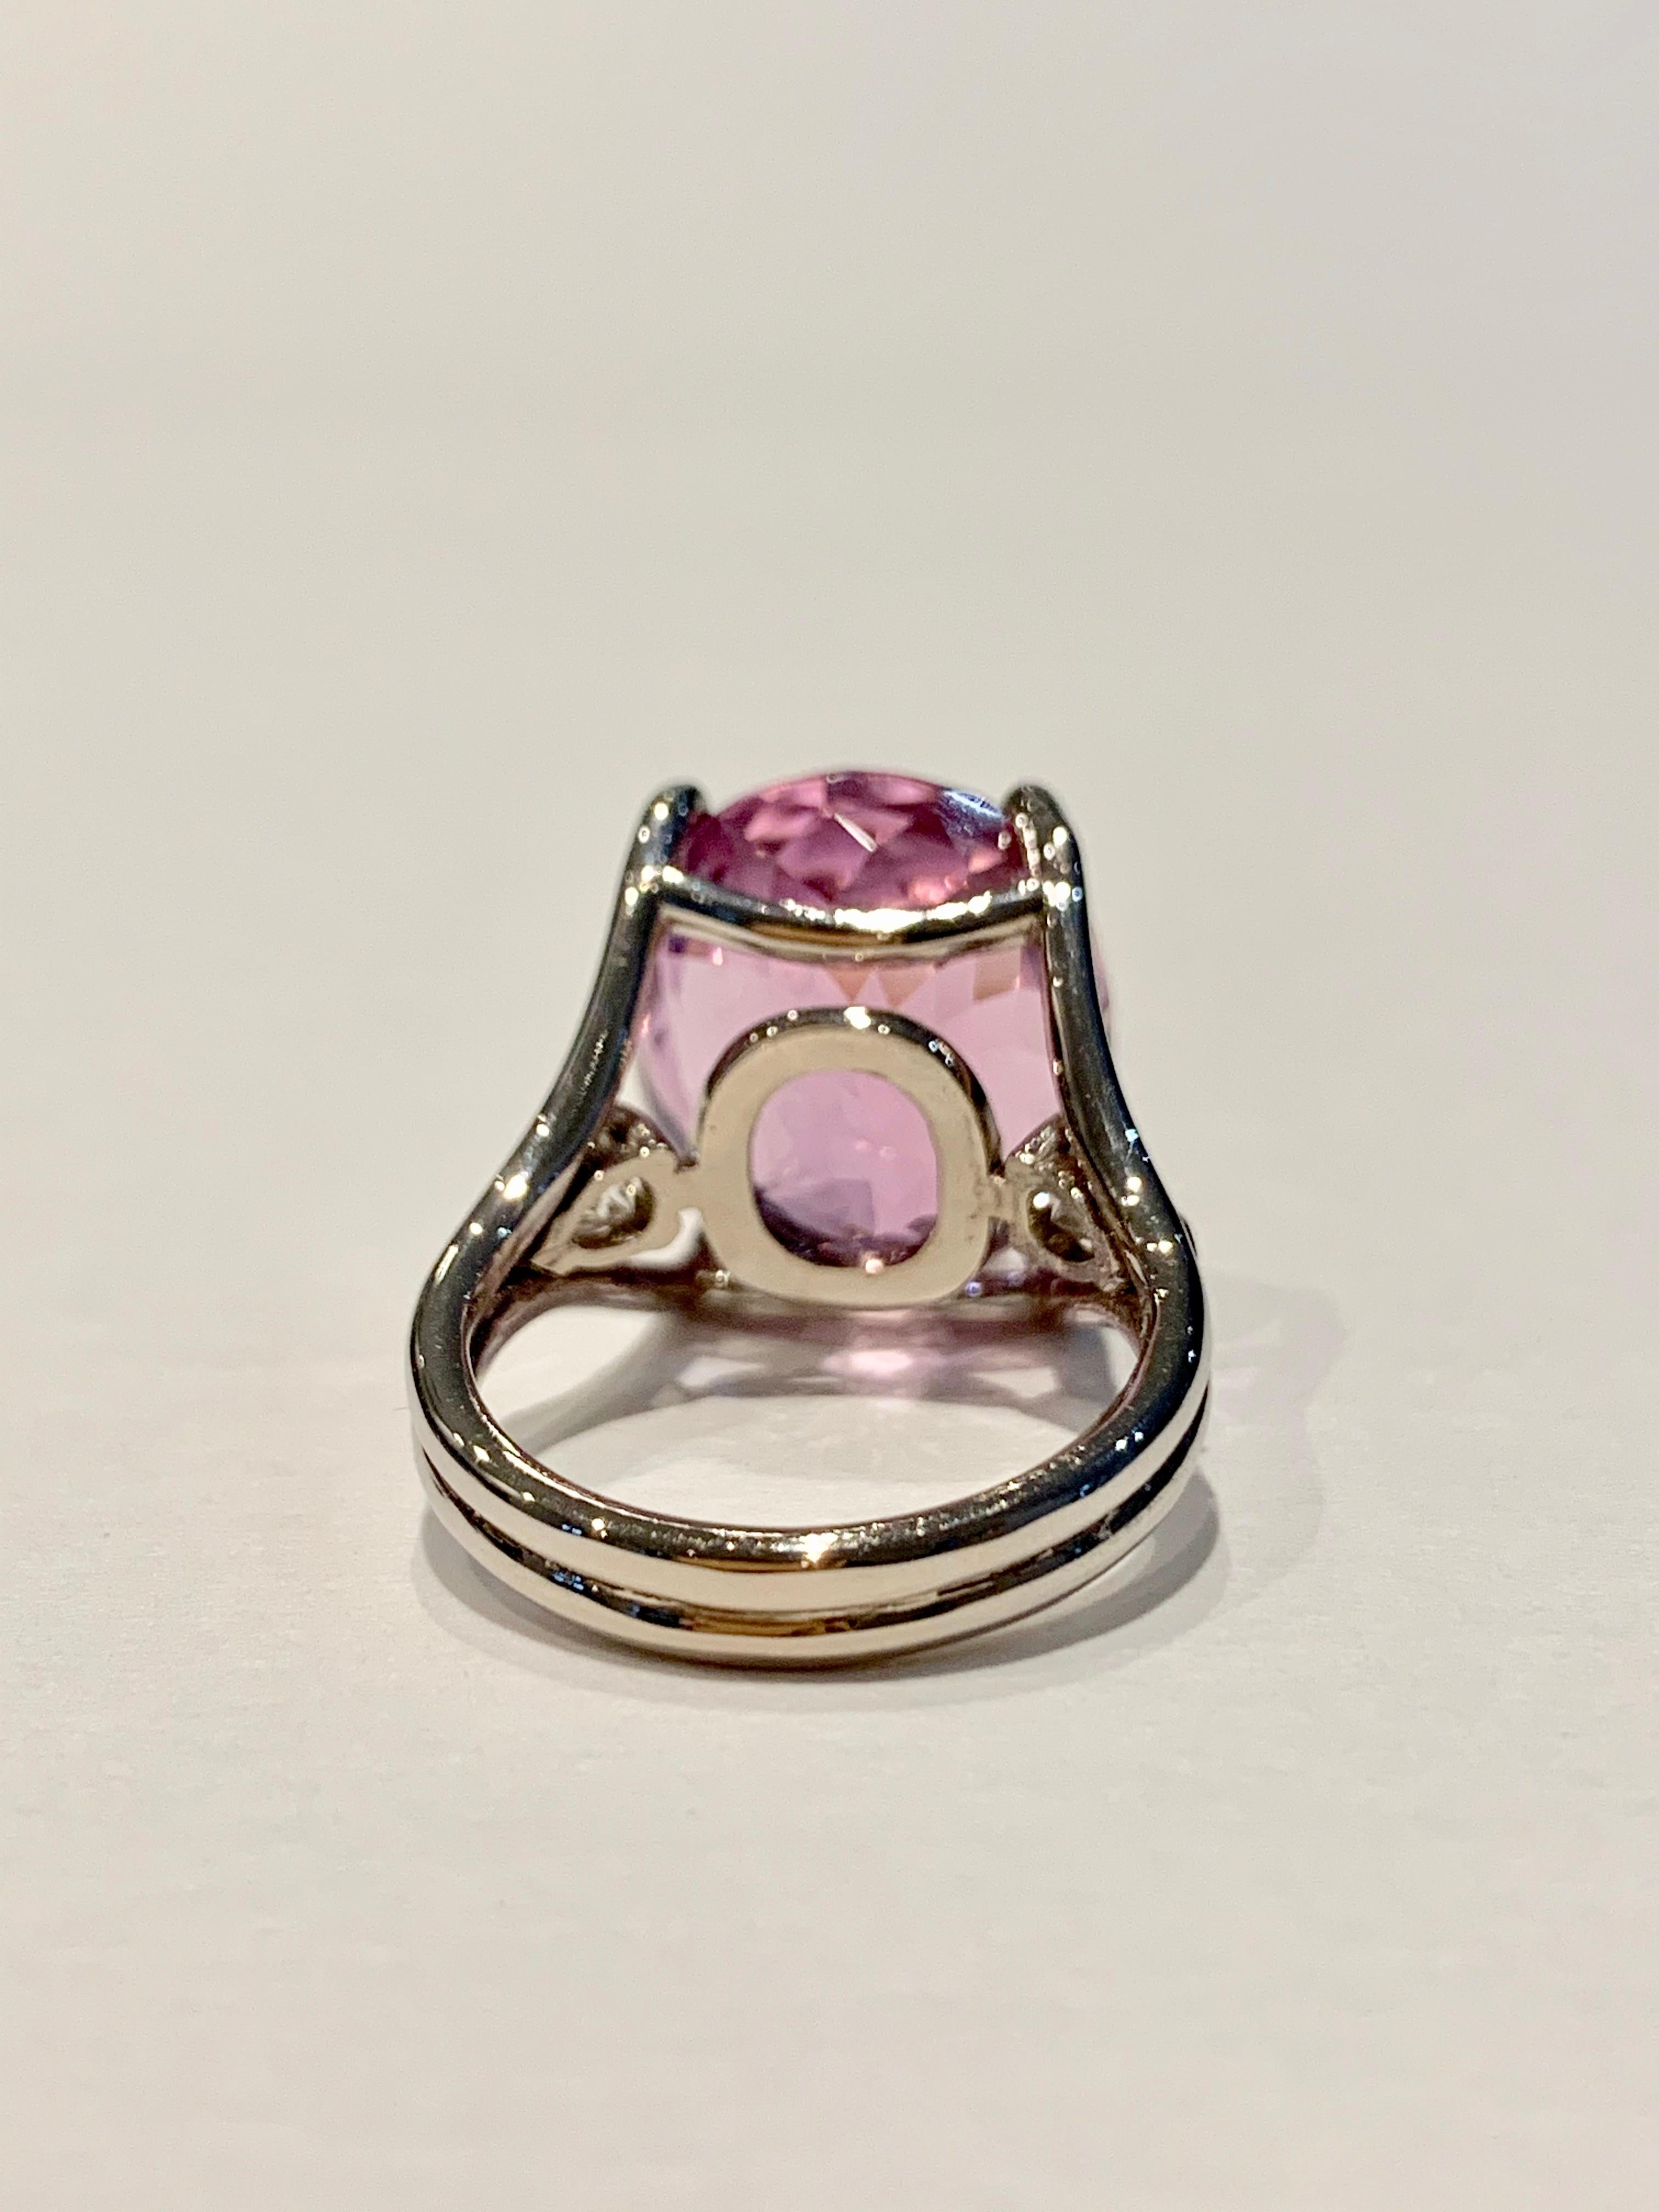 Bespoke 18 Carat Pink Oval Kunzite and Diamond Ring in 18 Carat White Gold In New Condition For Sale In Chislehurst, Kent